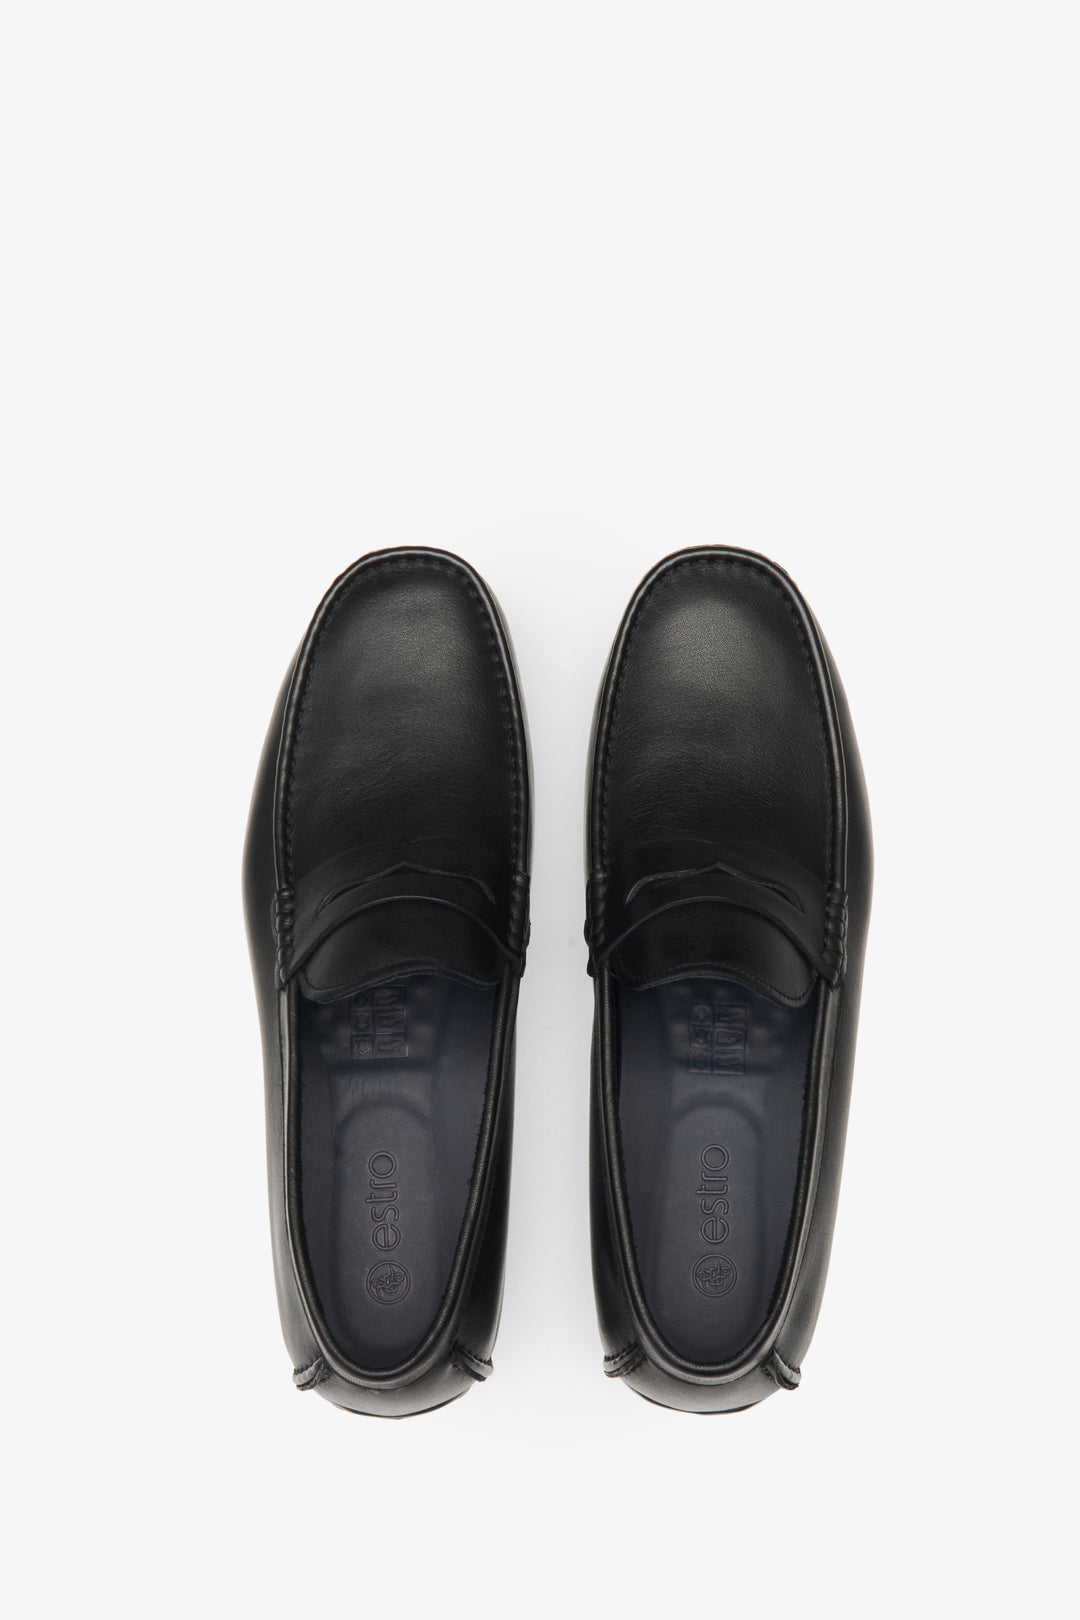 Men's black leather loafers - top view shoe presentation.